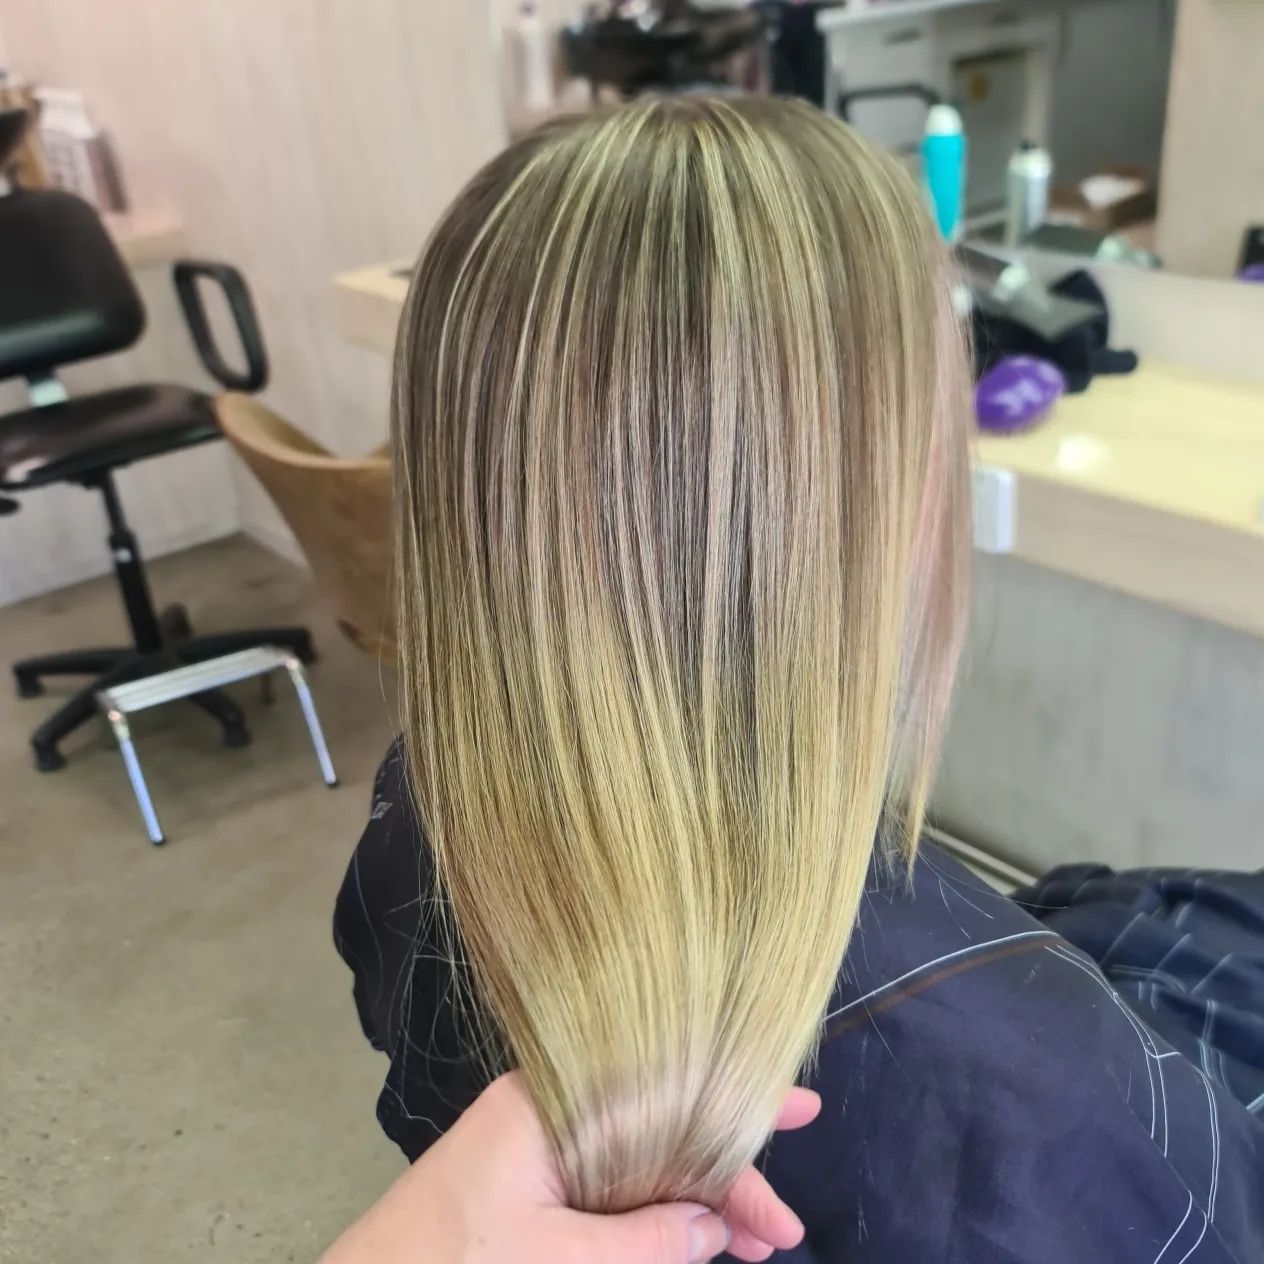 Highlights 17 Hair color pictures with highlights and lowlights | Hair highlights for dark hair | Hair highlights for light hair Highlights for Women